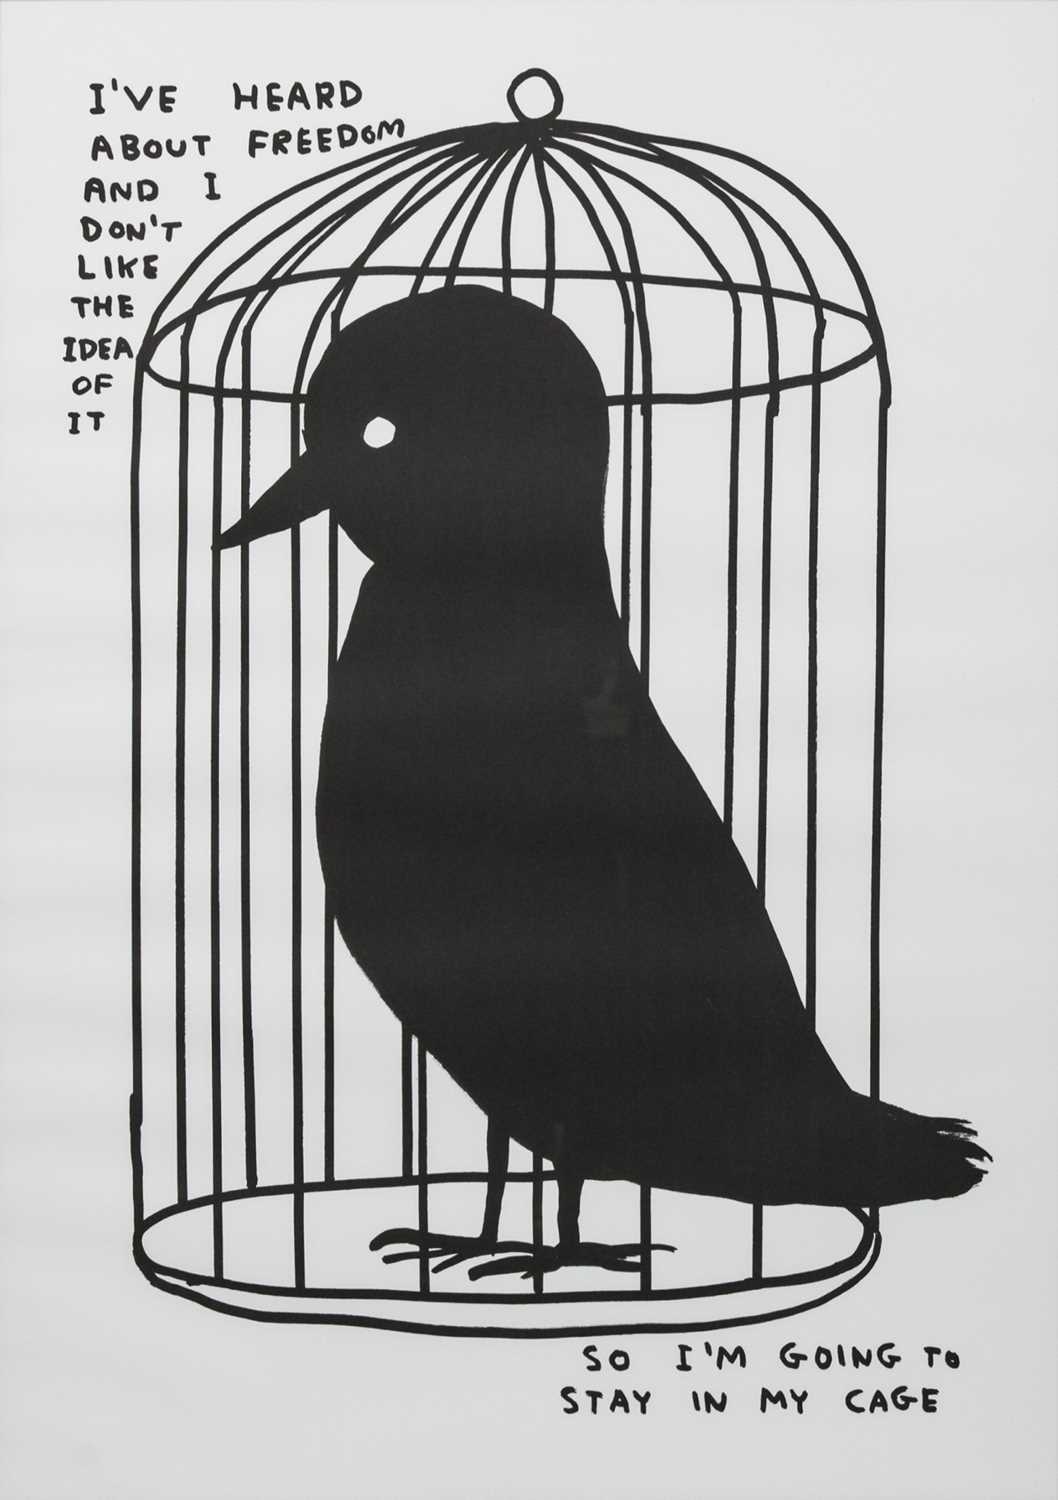 Lot 76 - I'VE HEARD ABOUT FREEDOM, A LITHOGRAPH BY DAVID SHRIGLEY